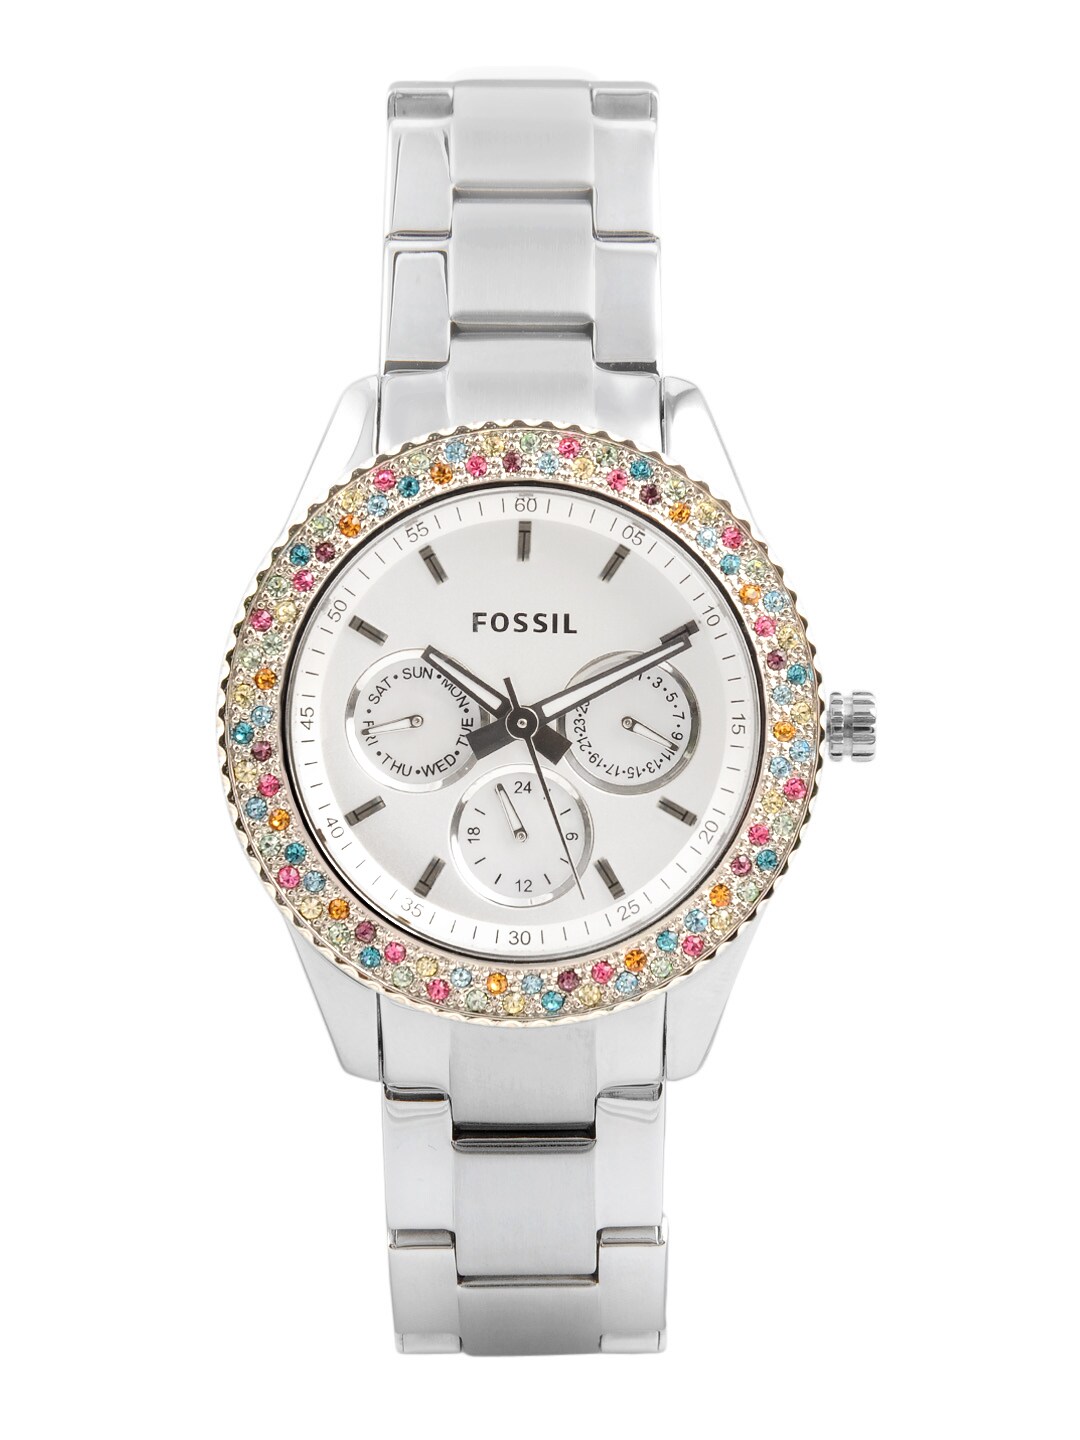 Fossil Women White Dial Chronograph Watch ES3049